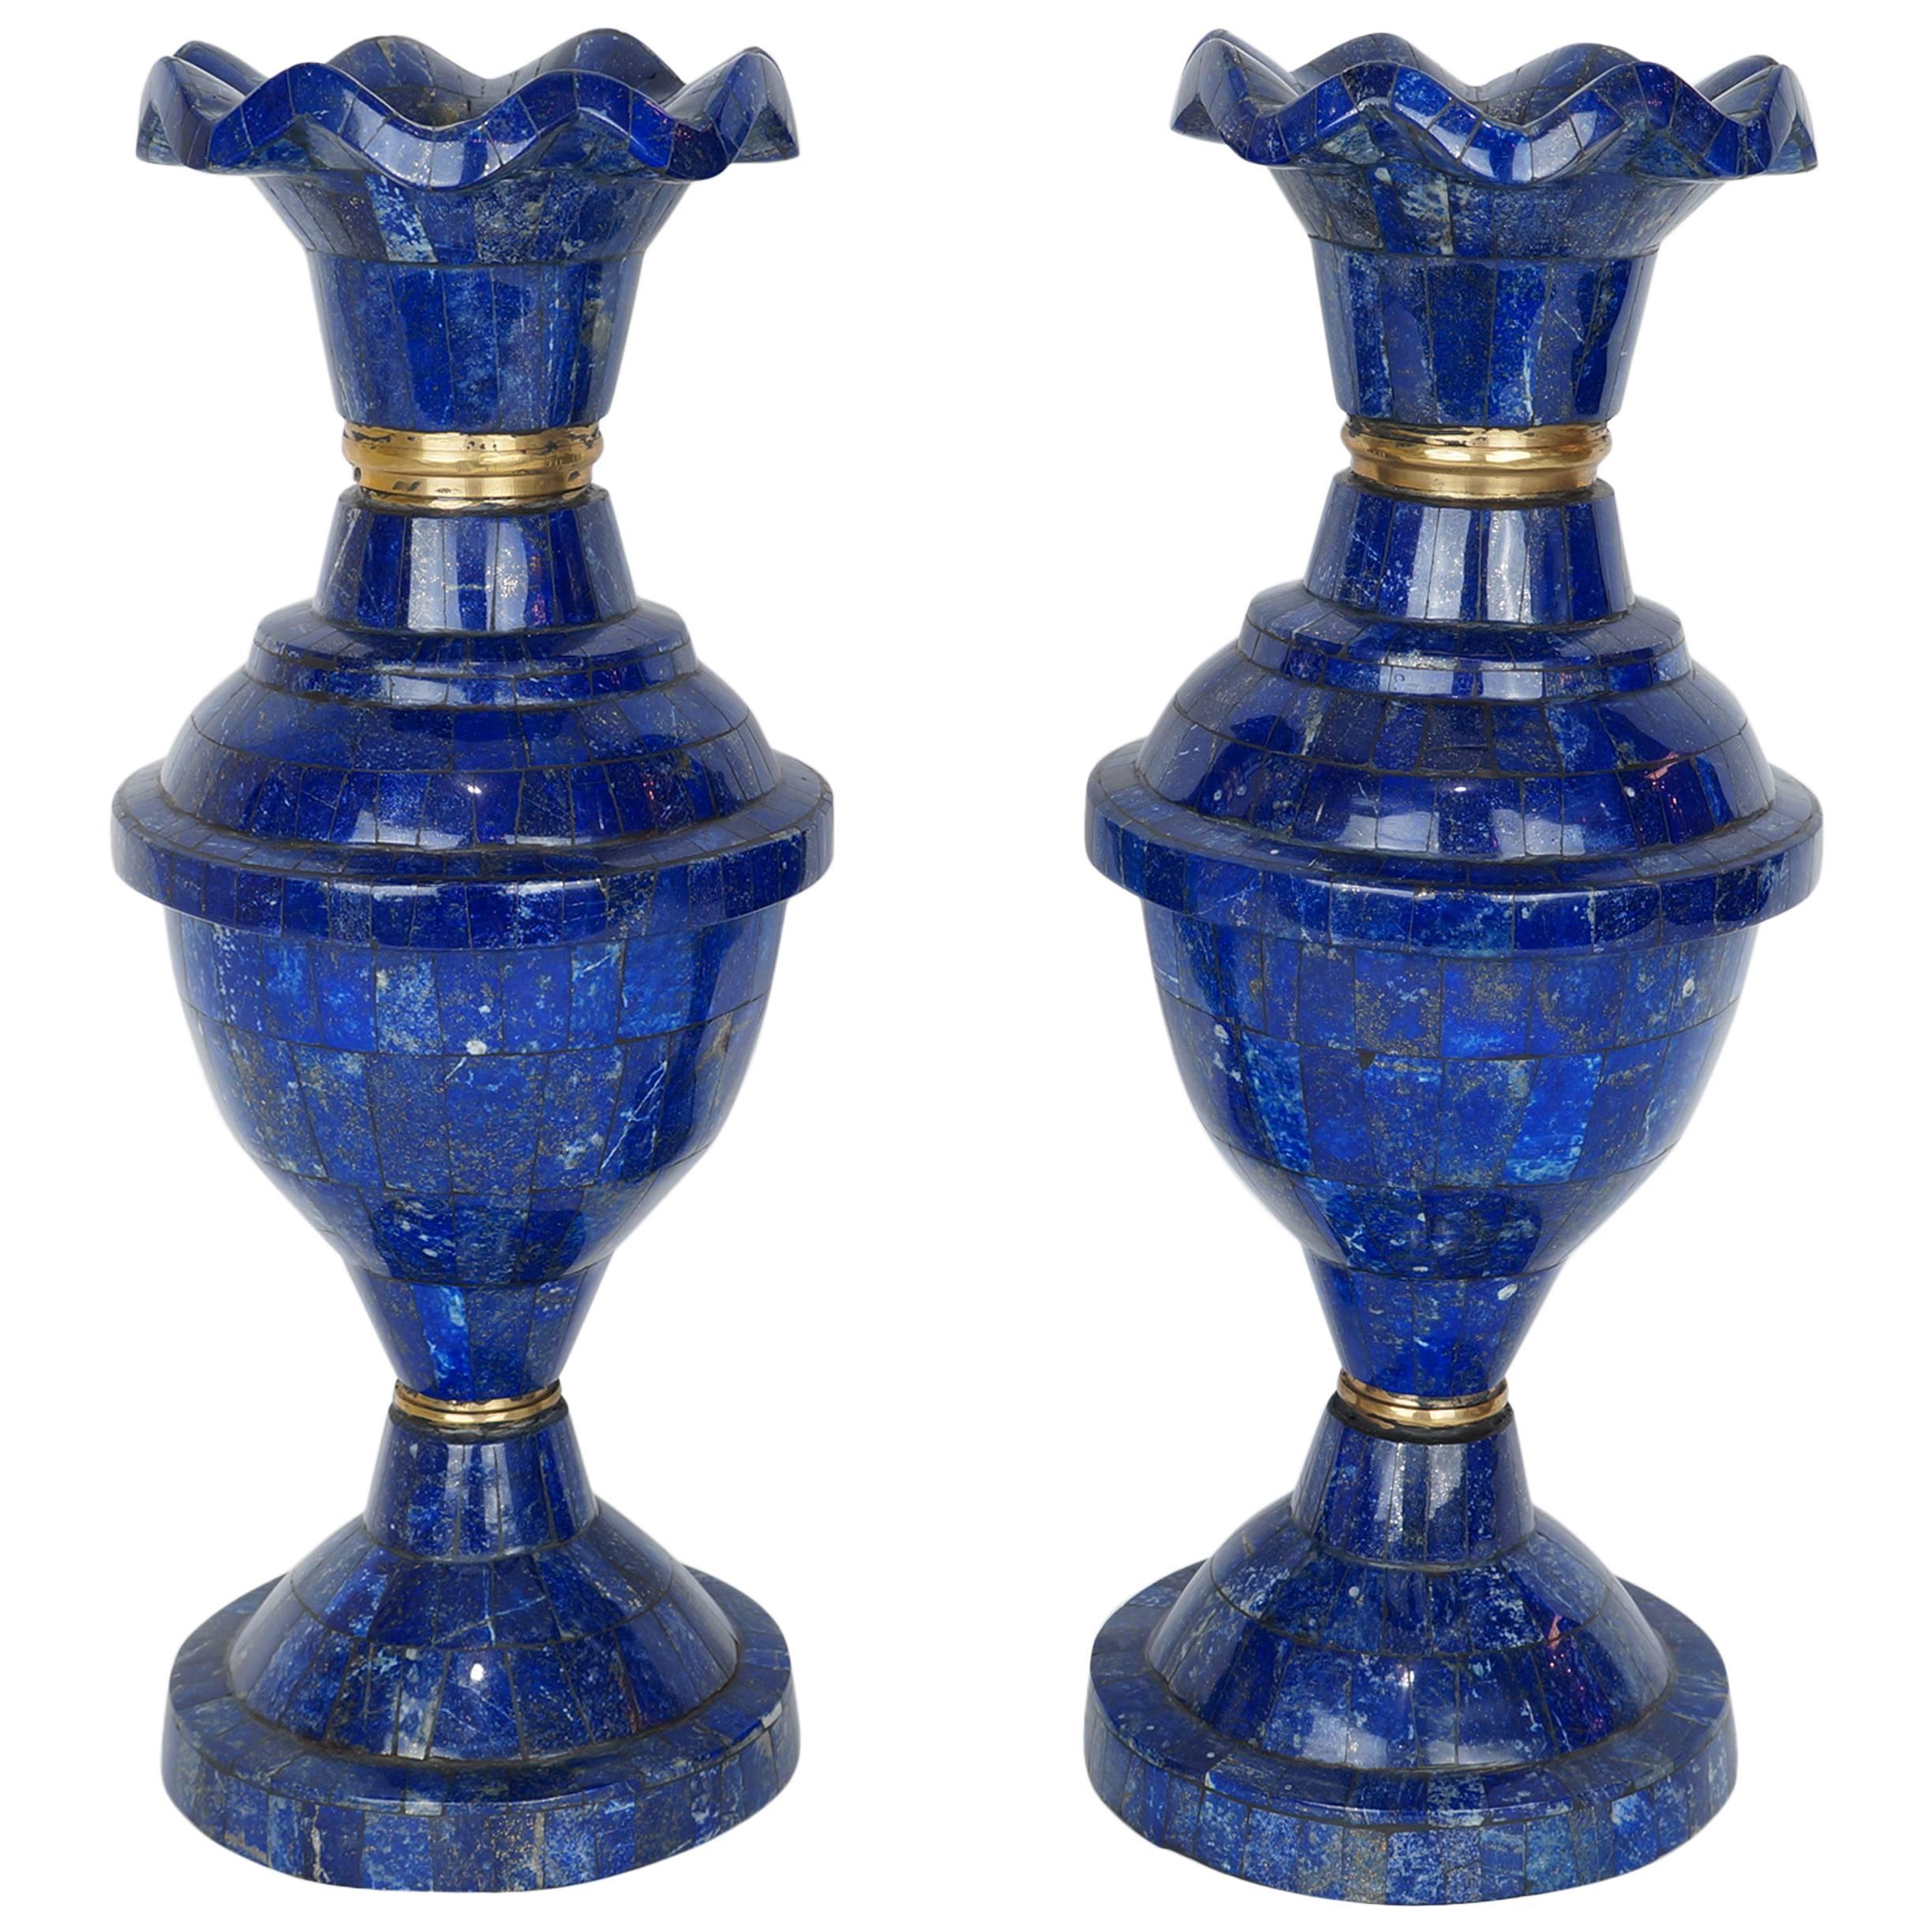 Pair of Blue Lapis Lazuli and Bronze Tall Vases with Flare Top